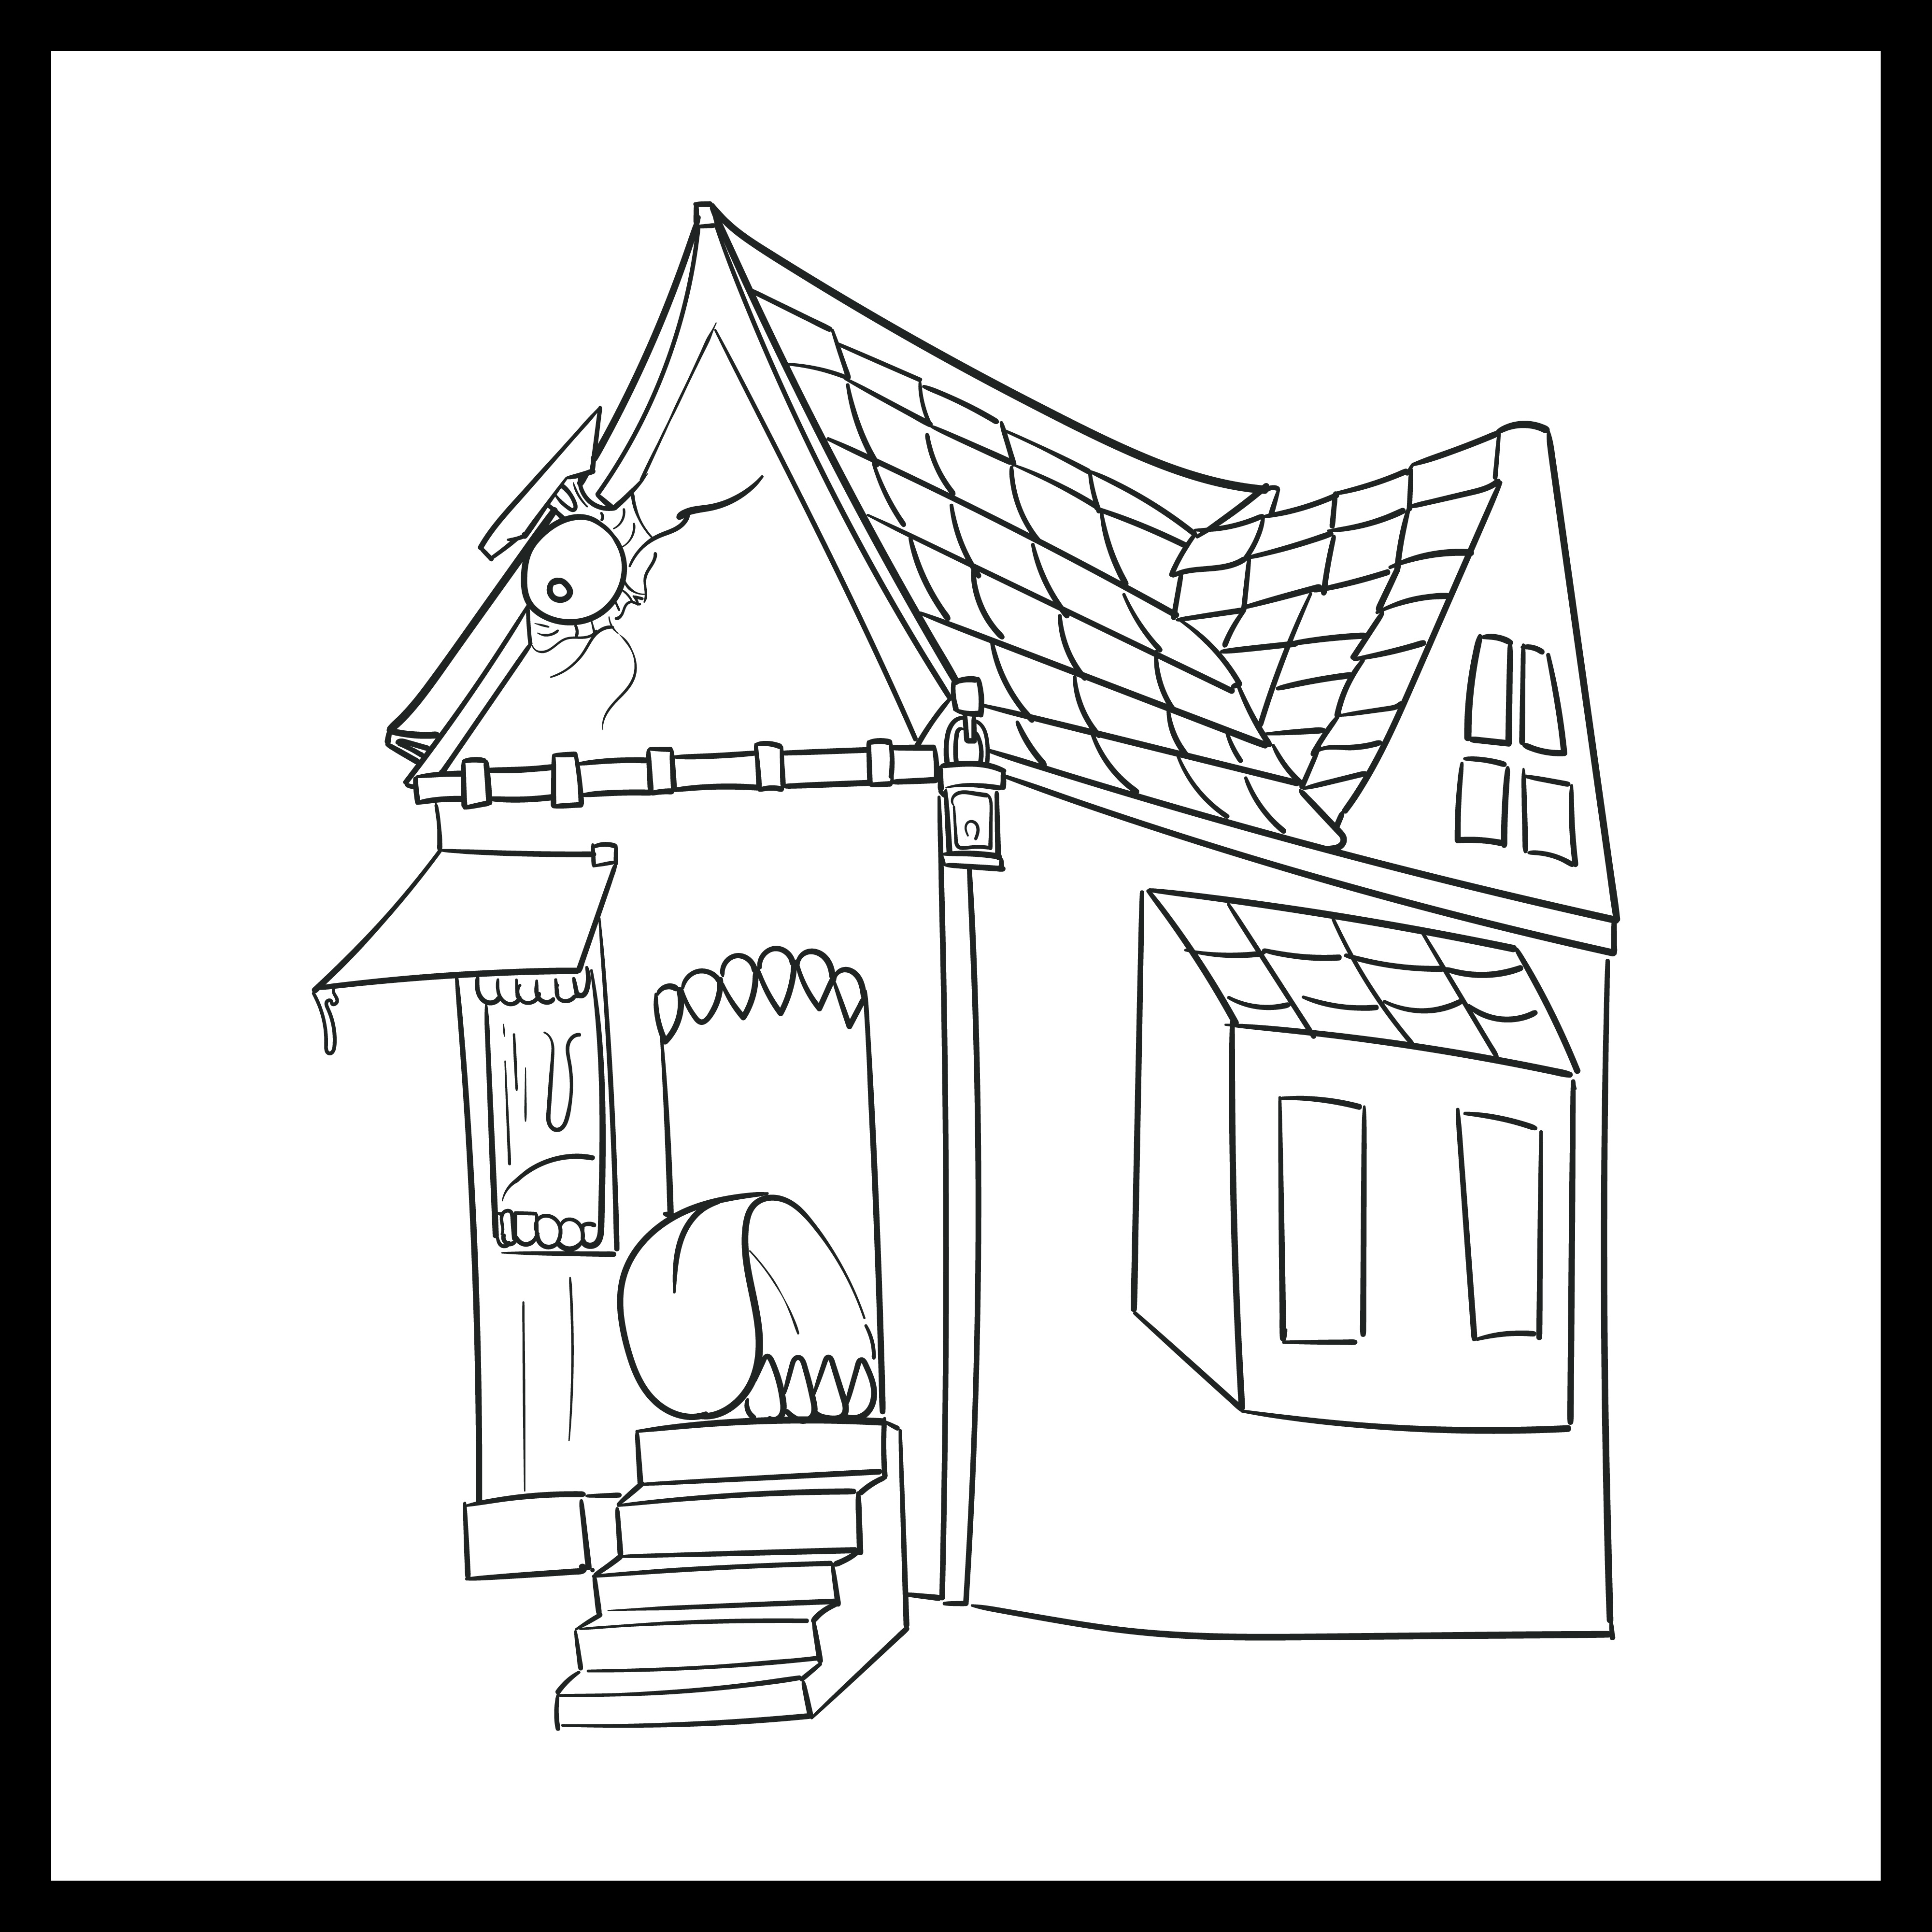 Free Printable Halloween Coloring Pages Haunted House